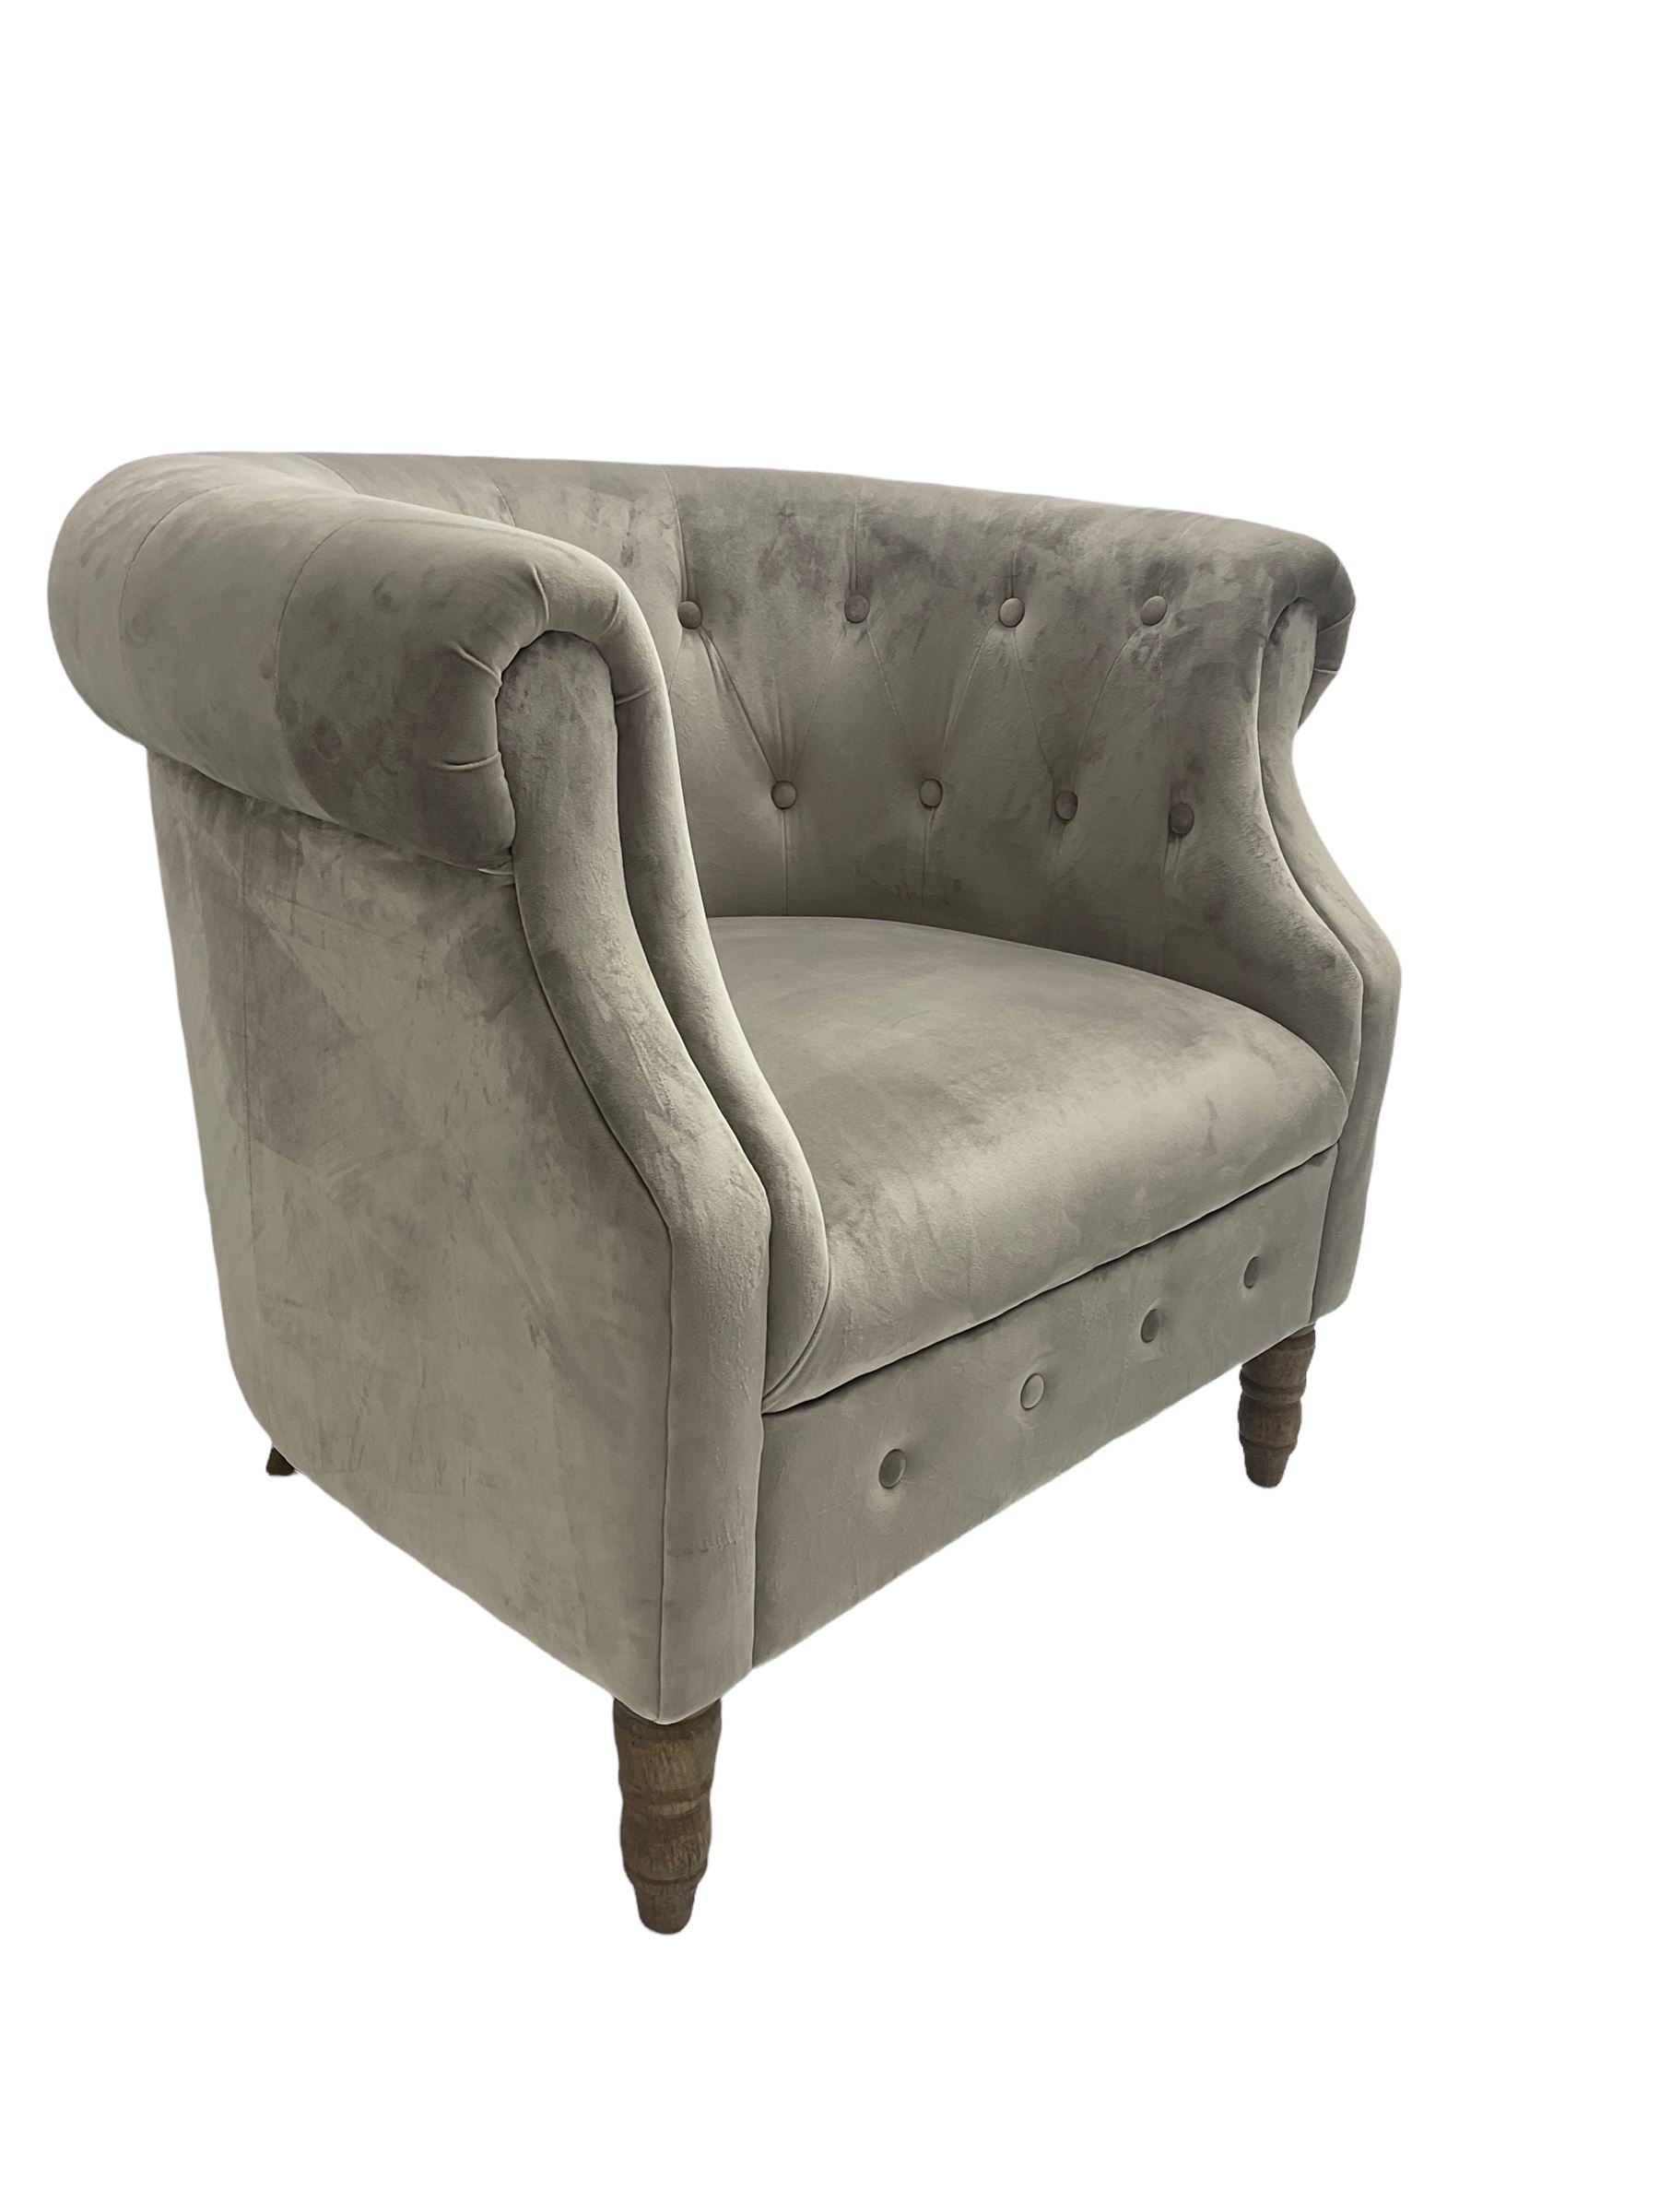 Grey velvet Chesterfield button pressed tub chair with rolled arms - Image 5 of 6